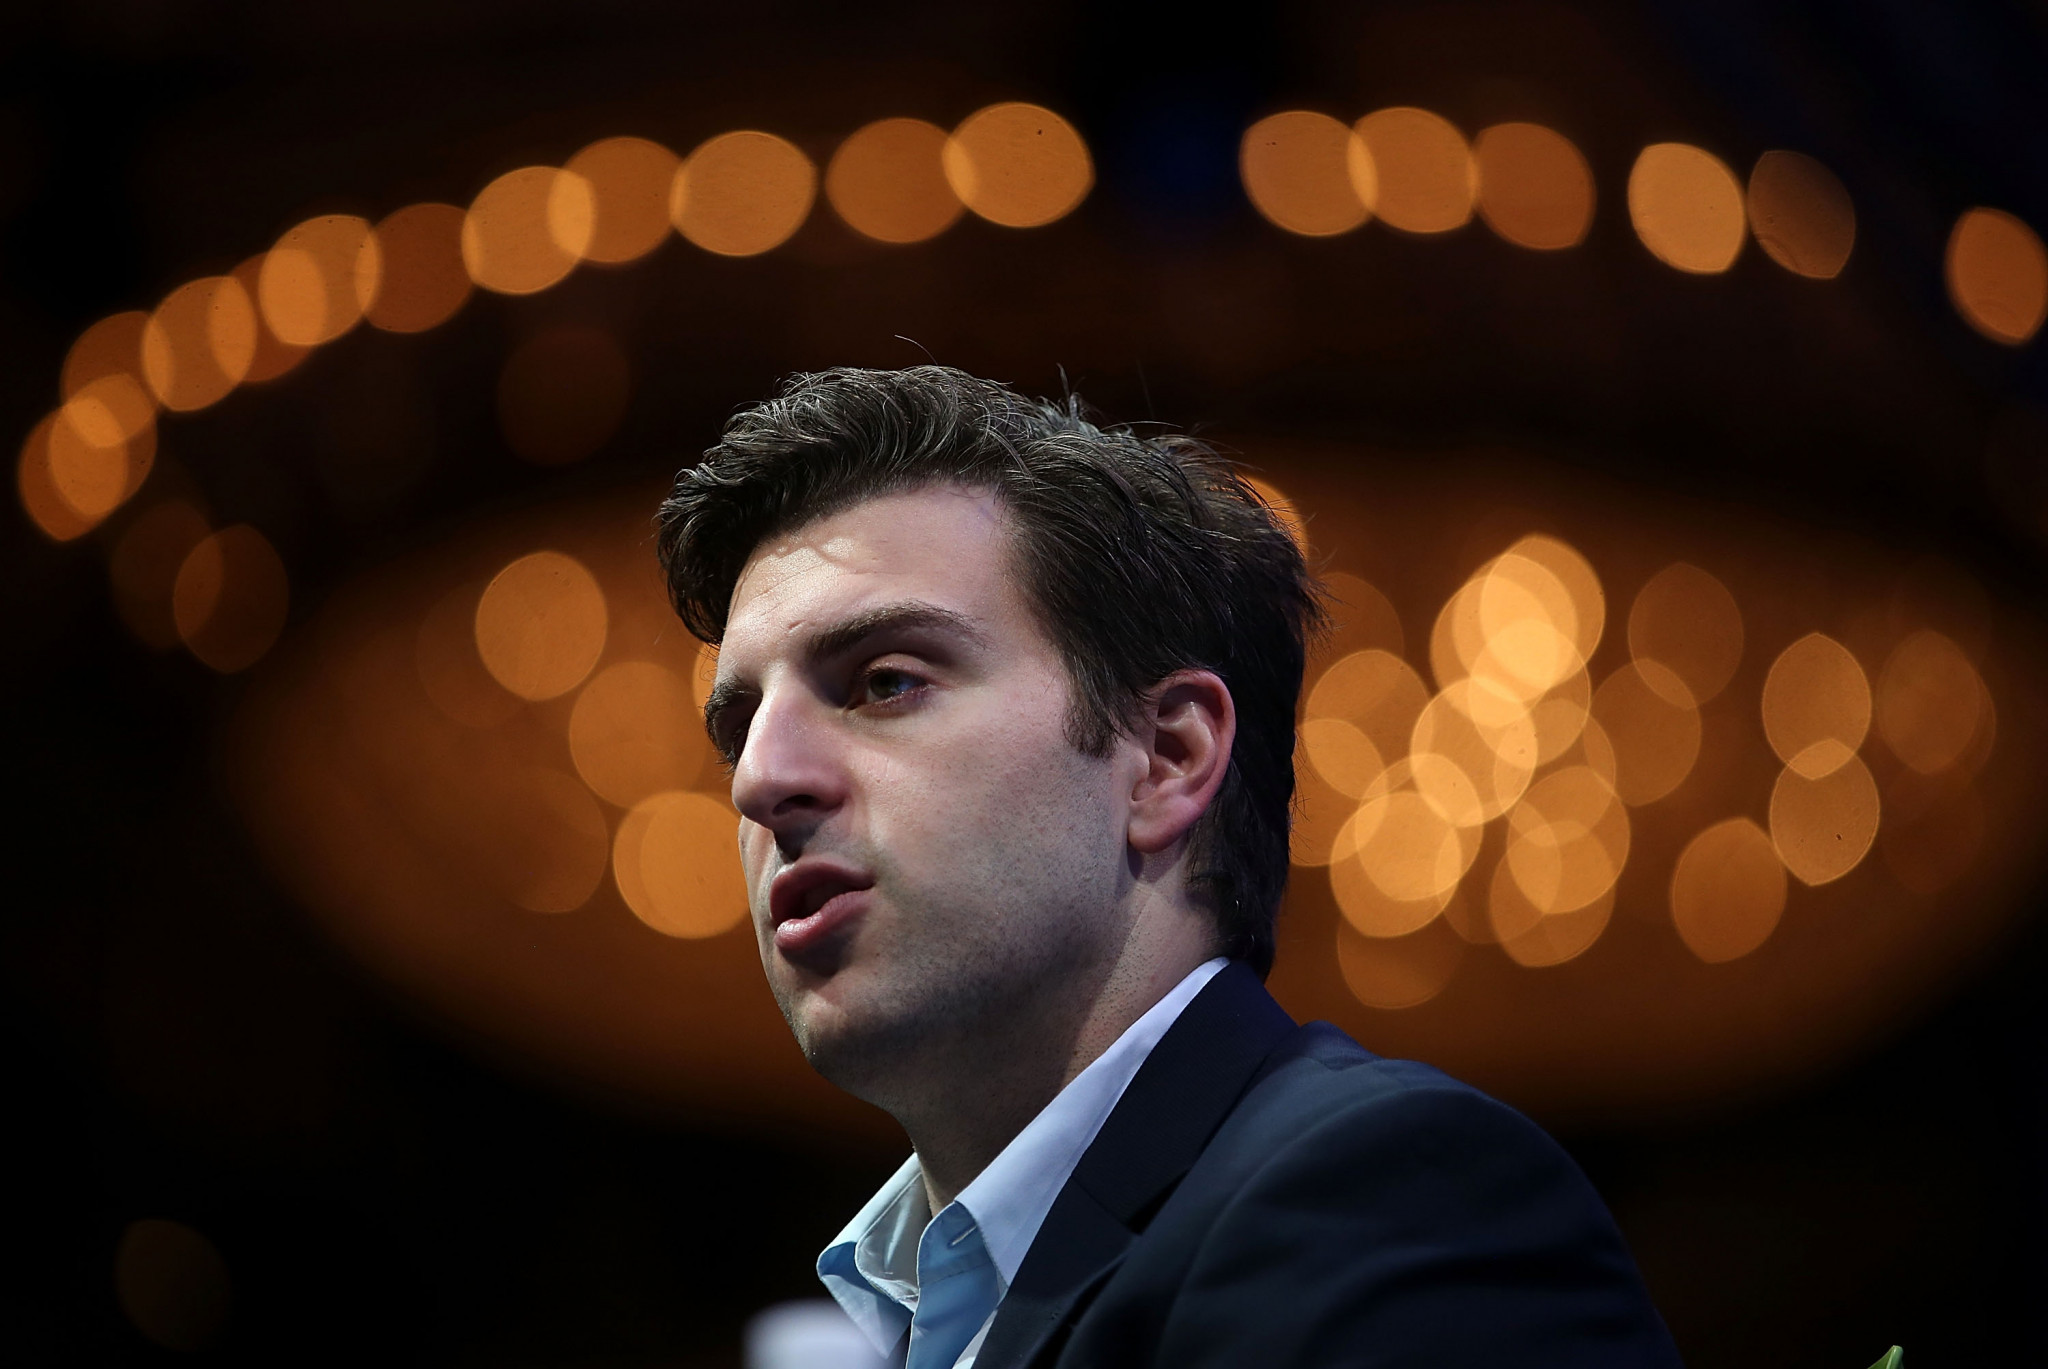 Airbnb CEO Brian Chesky was invited to meet with activists virtually © Getty Images